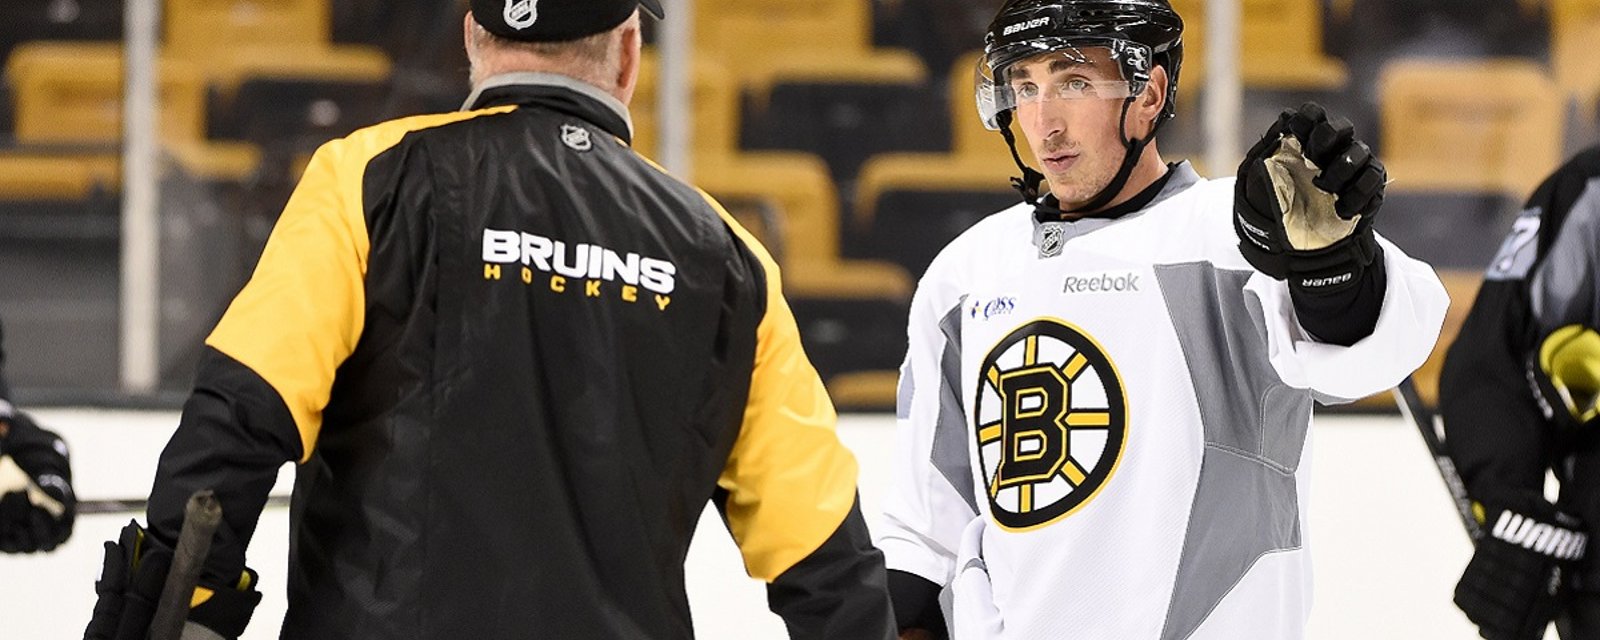 Cameras catch a hilarious moment between Brad Marchand and his coach.